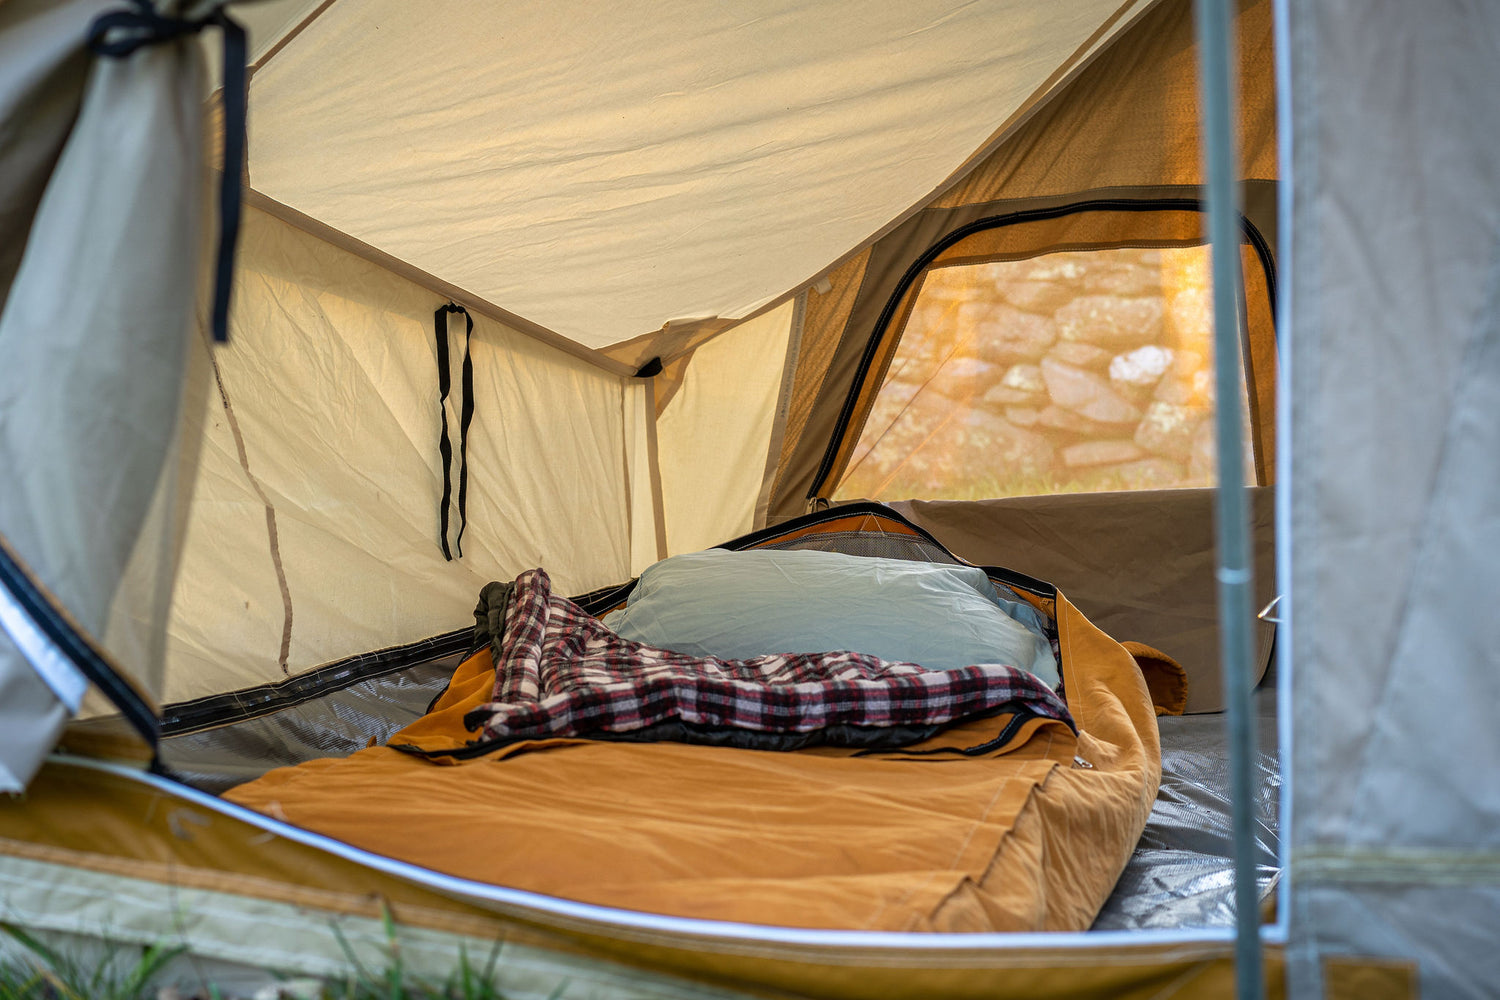 Canvas Cowboy Bedroll sleep system, handmade in the USA by Dave Ellis